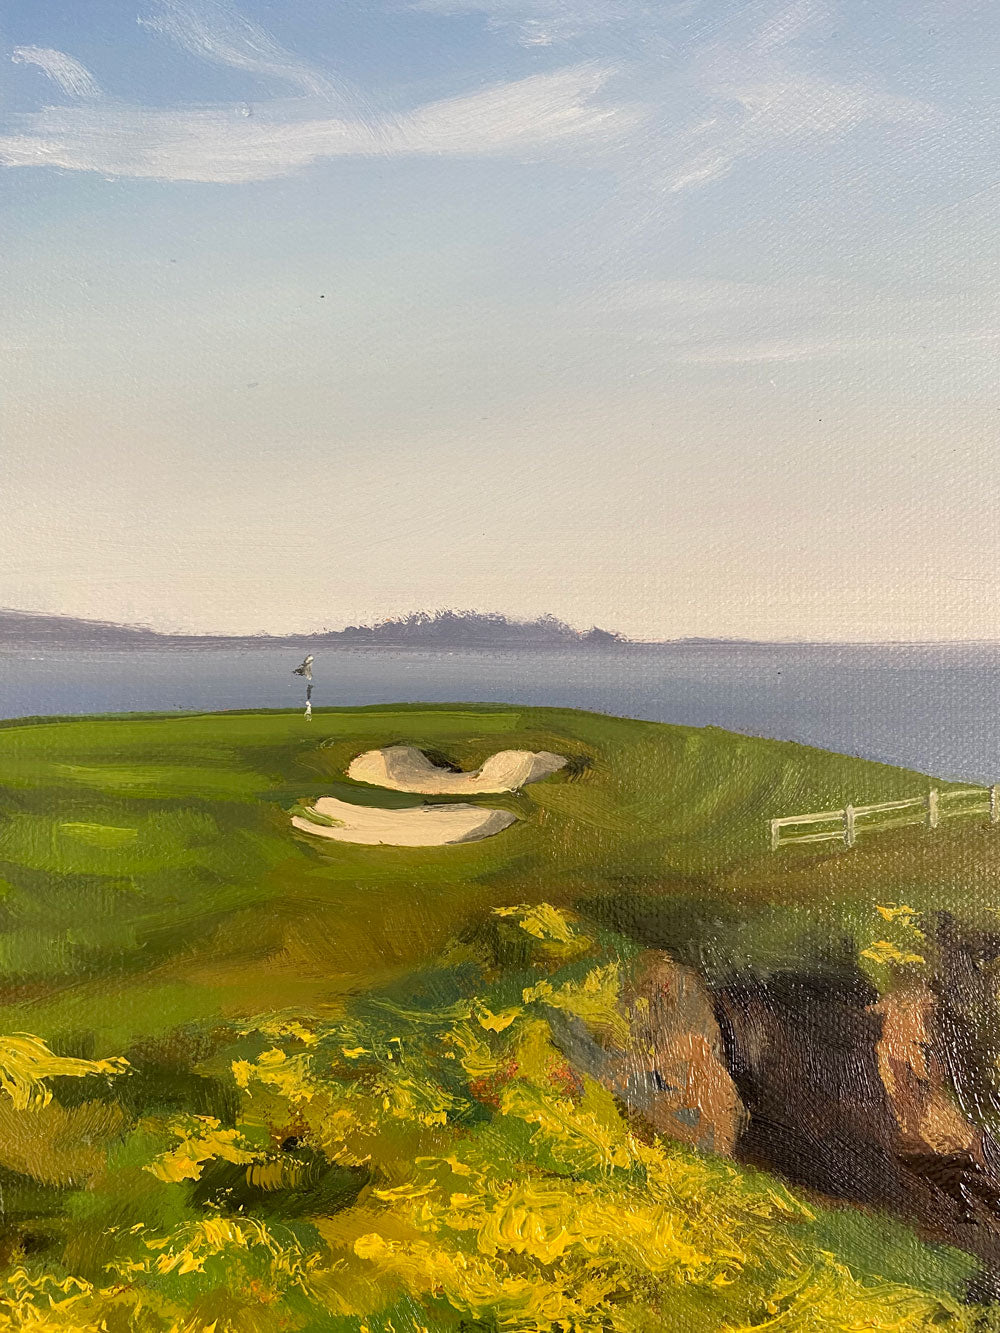 No. 6 at Pebble Beach,11" x 14" oil on canvas, original painting